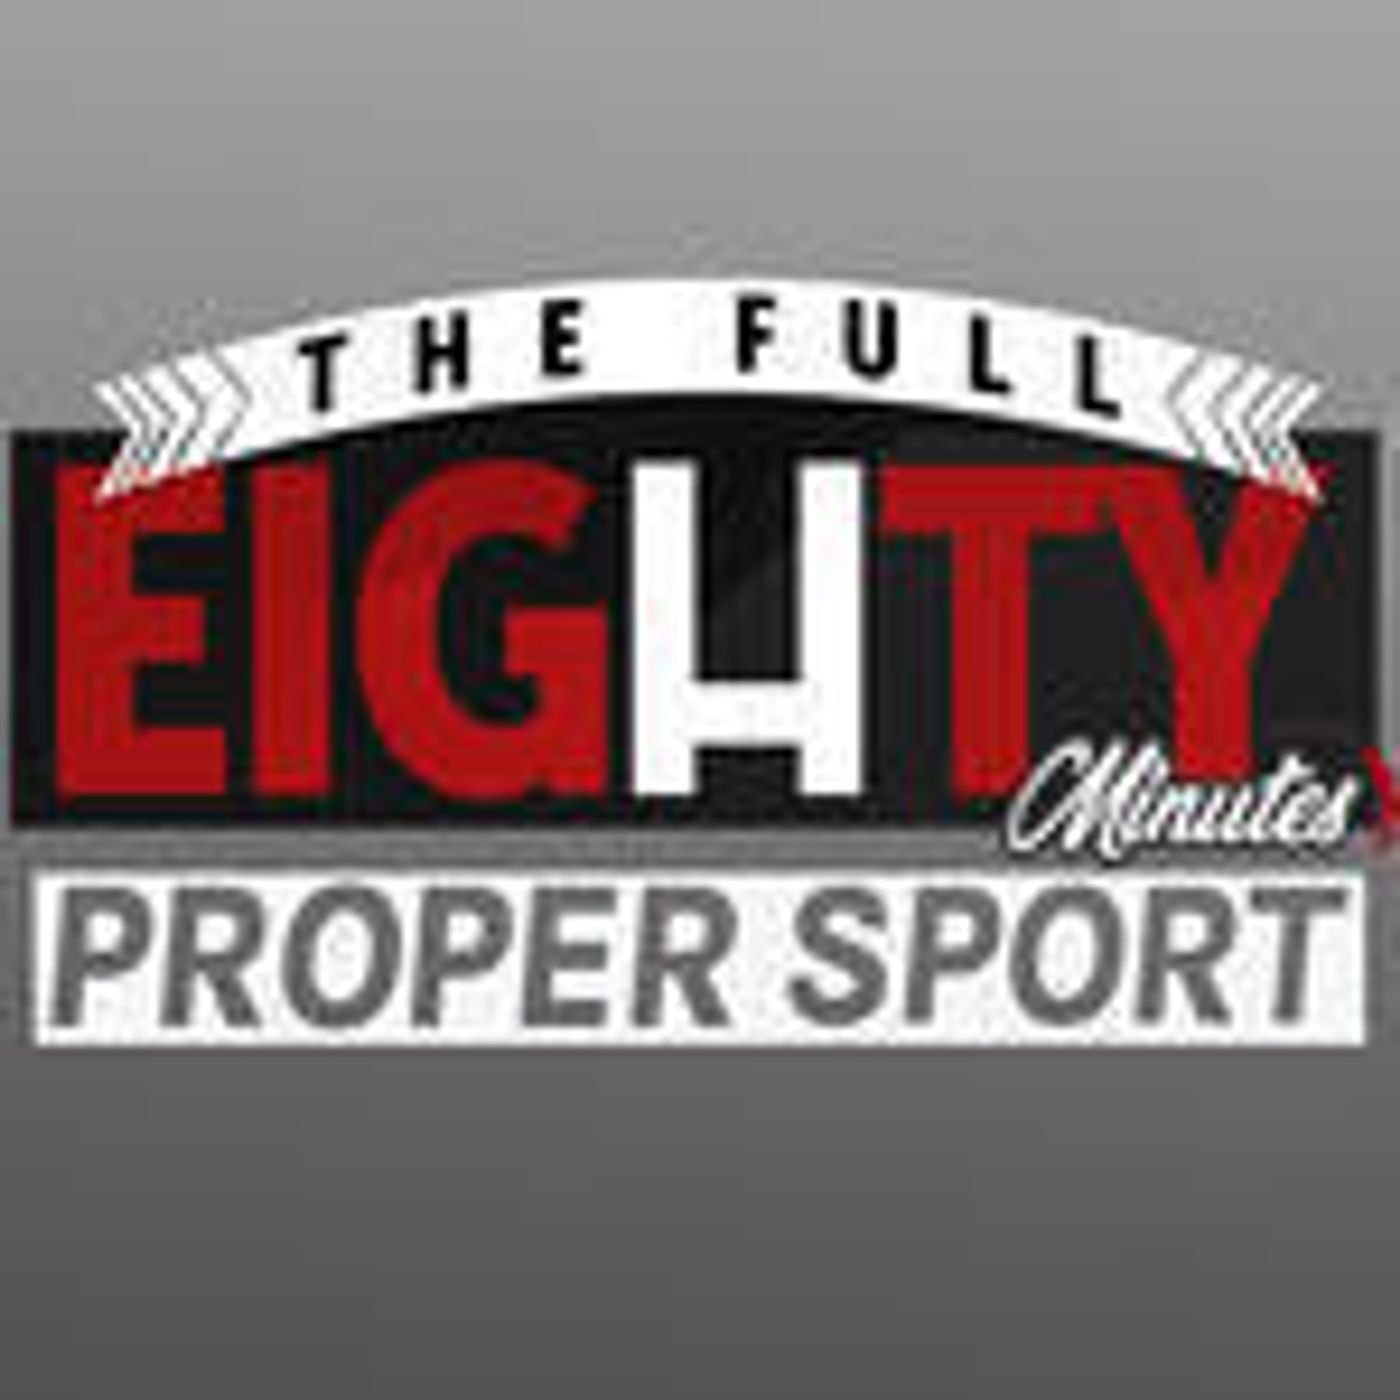 50: The Full Eighty Minutes - Episode 50